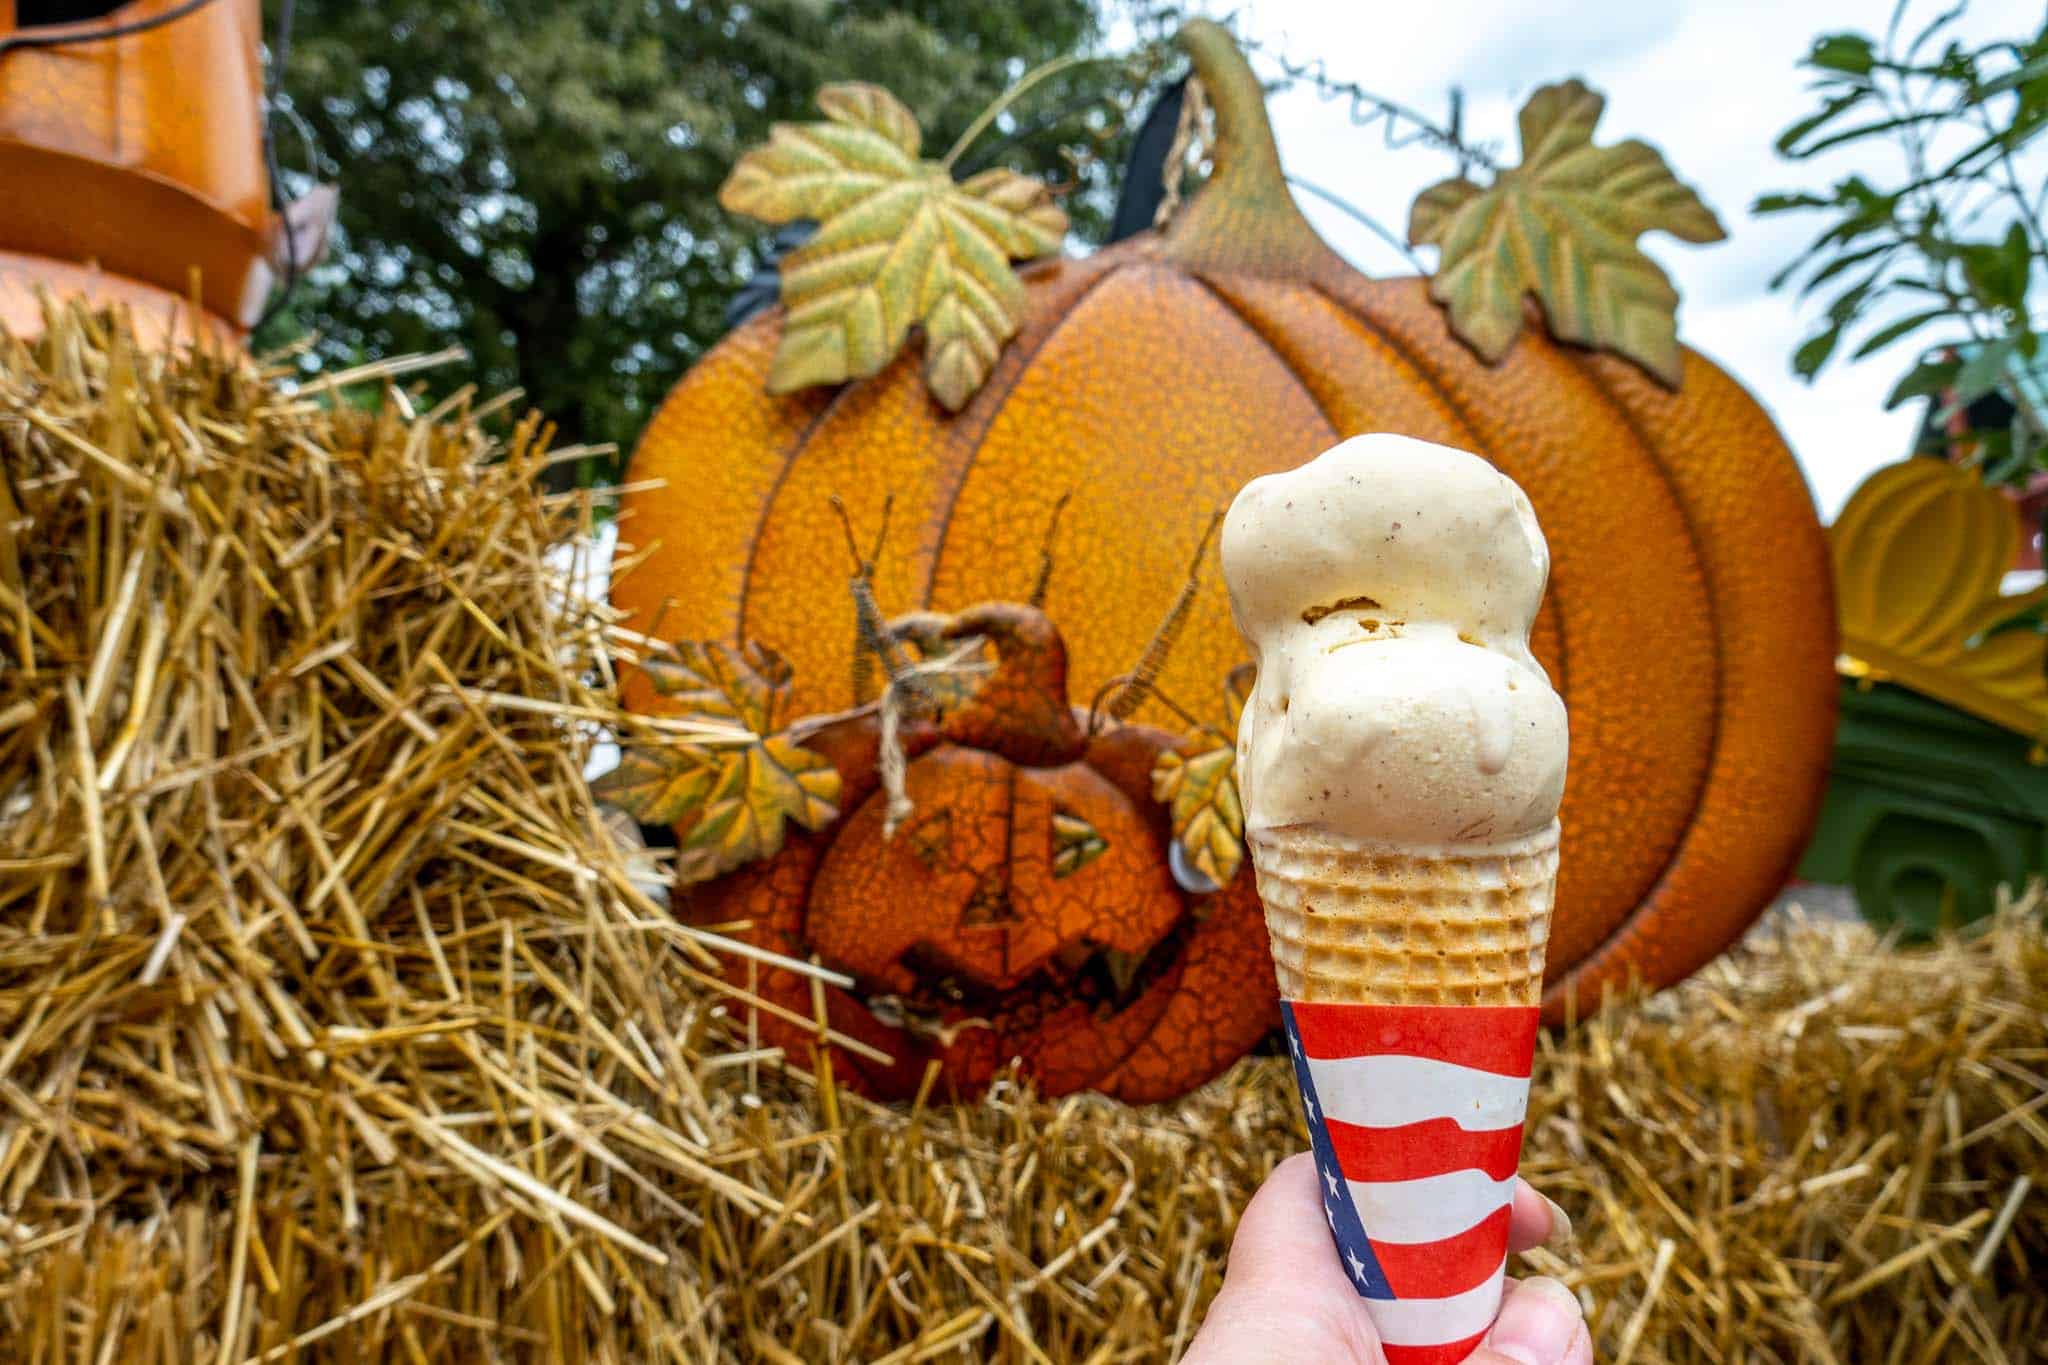 Ice cream cone in front of a pumpkin sign.